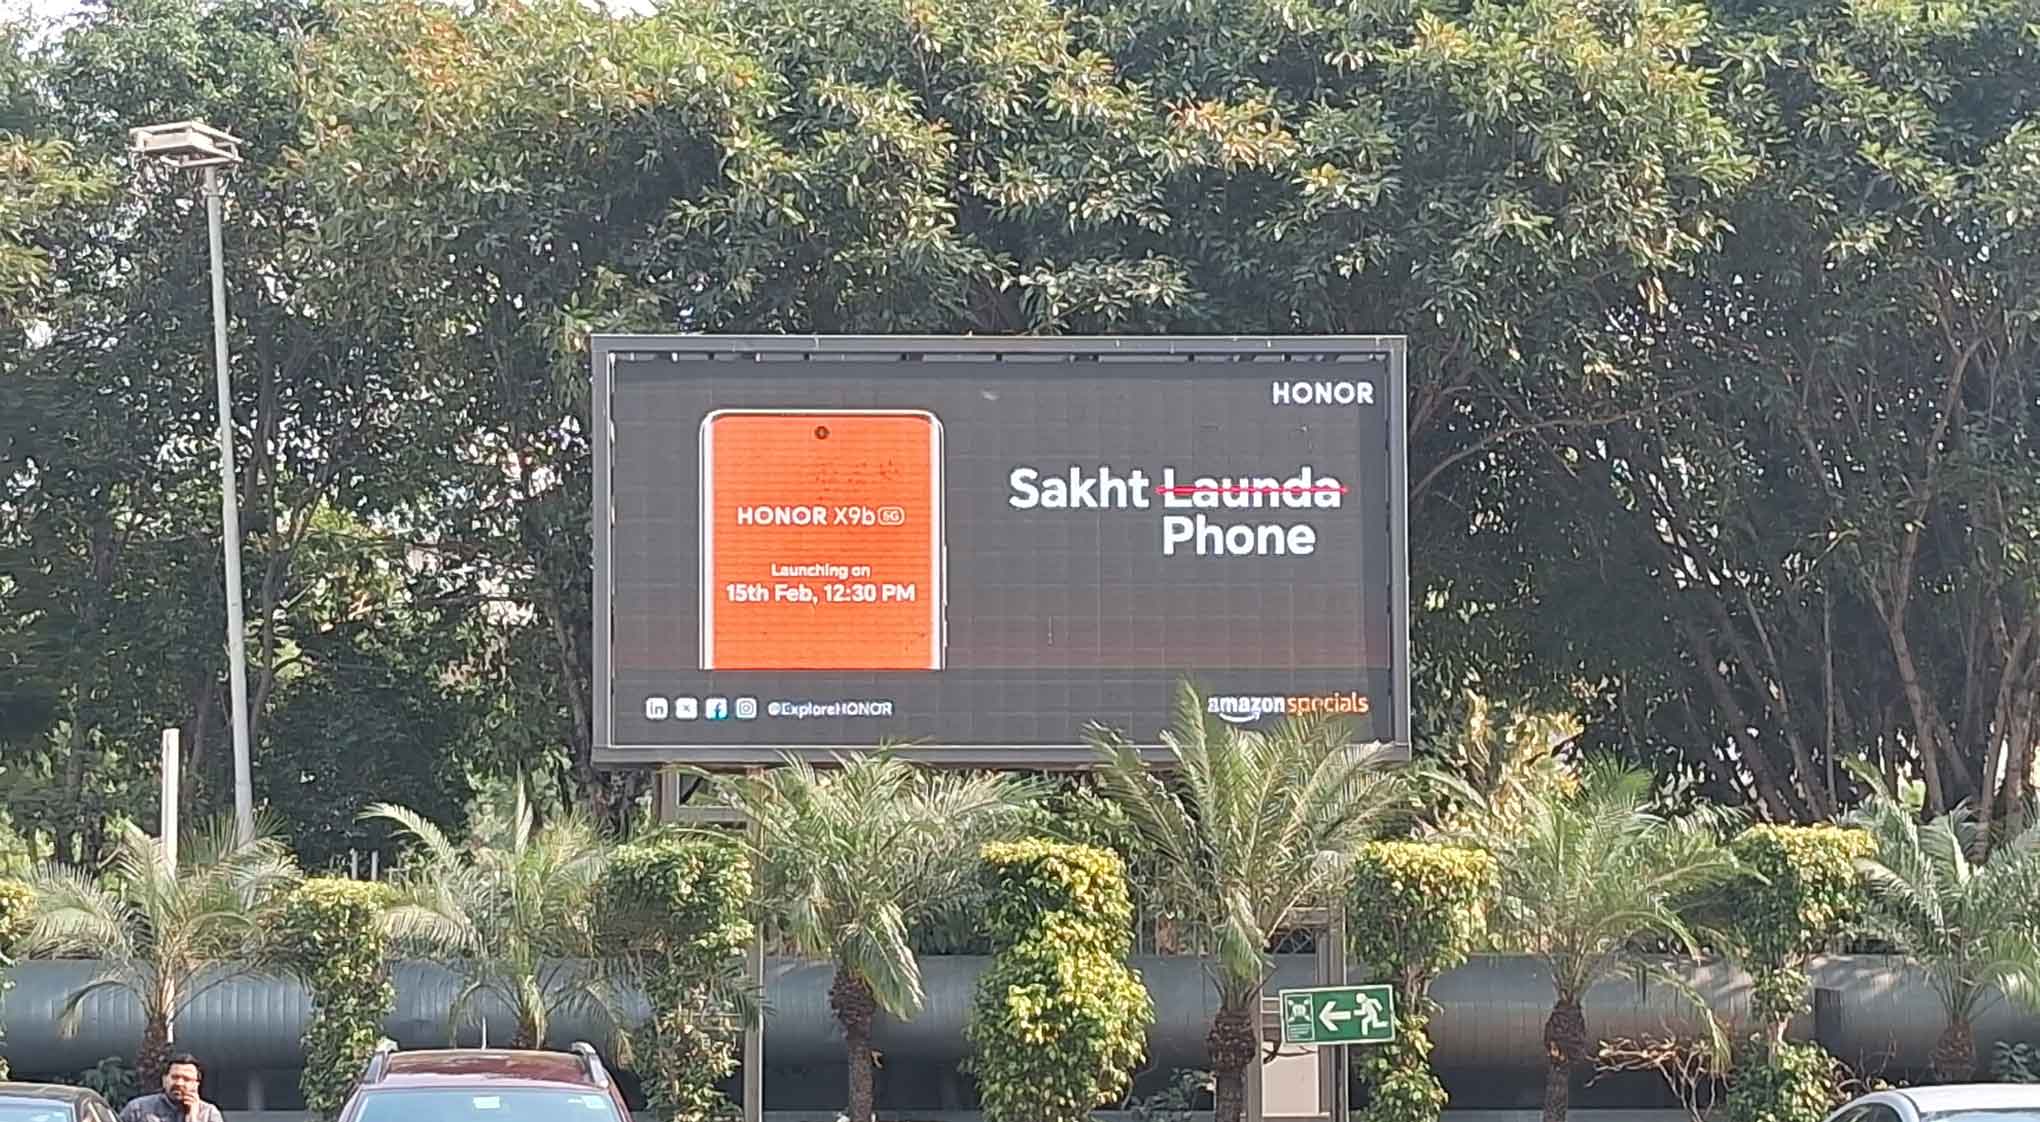 HONOR phone OOH campaign